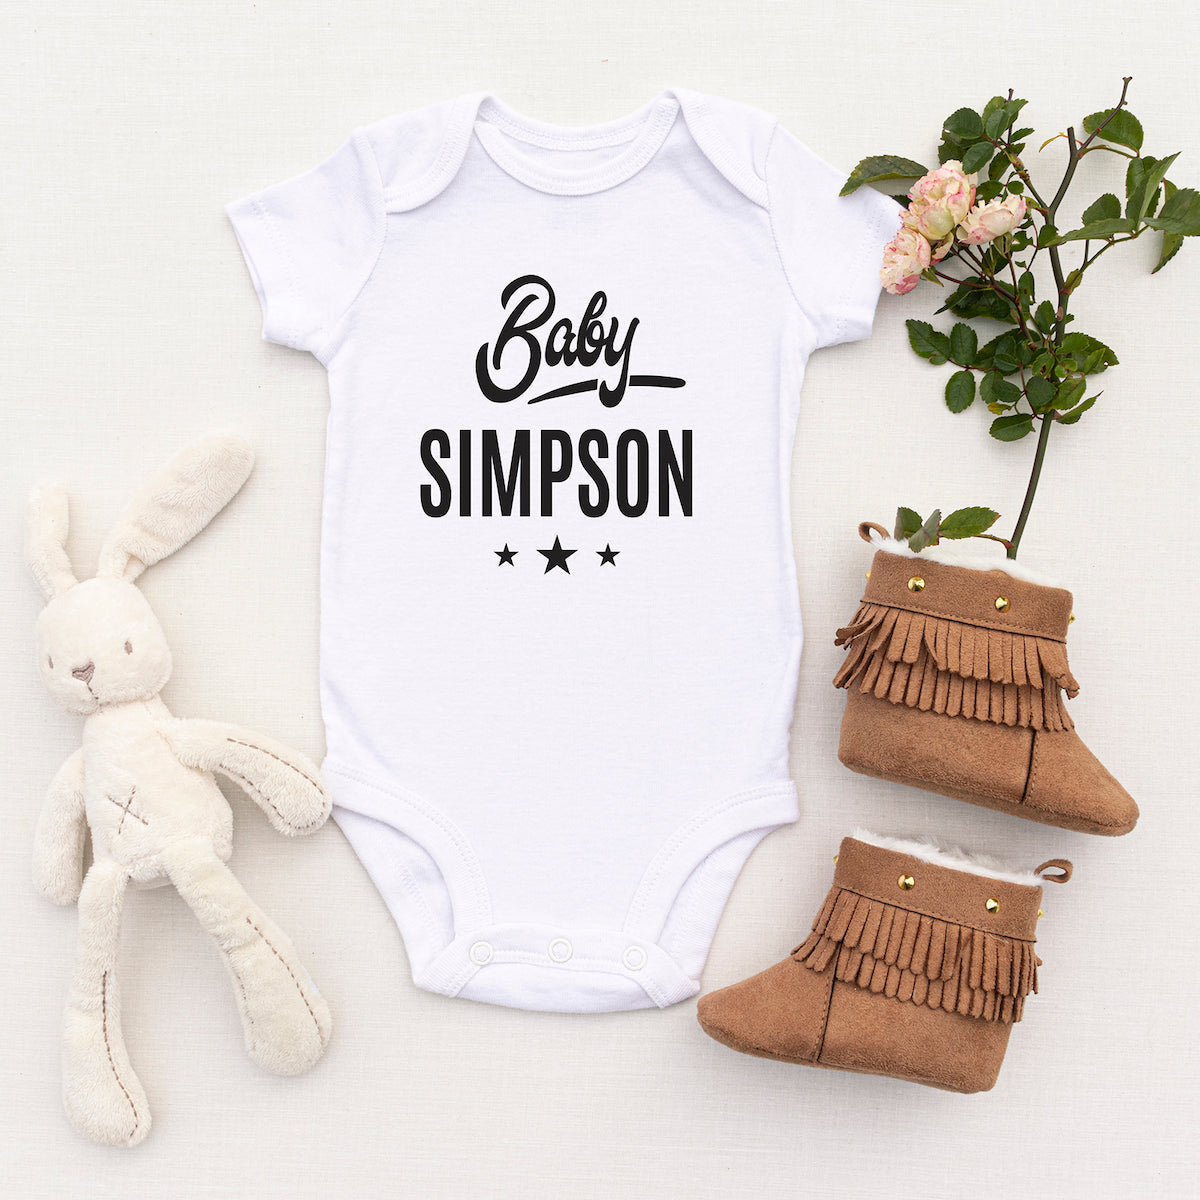 Personalised White Baby Body Suit Grow Vest - Star